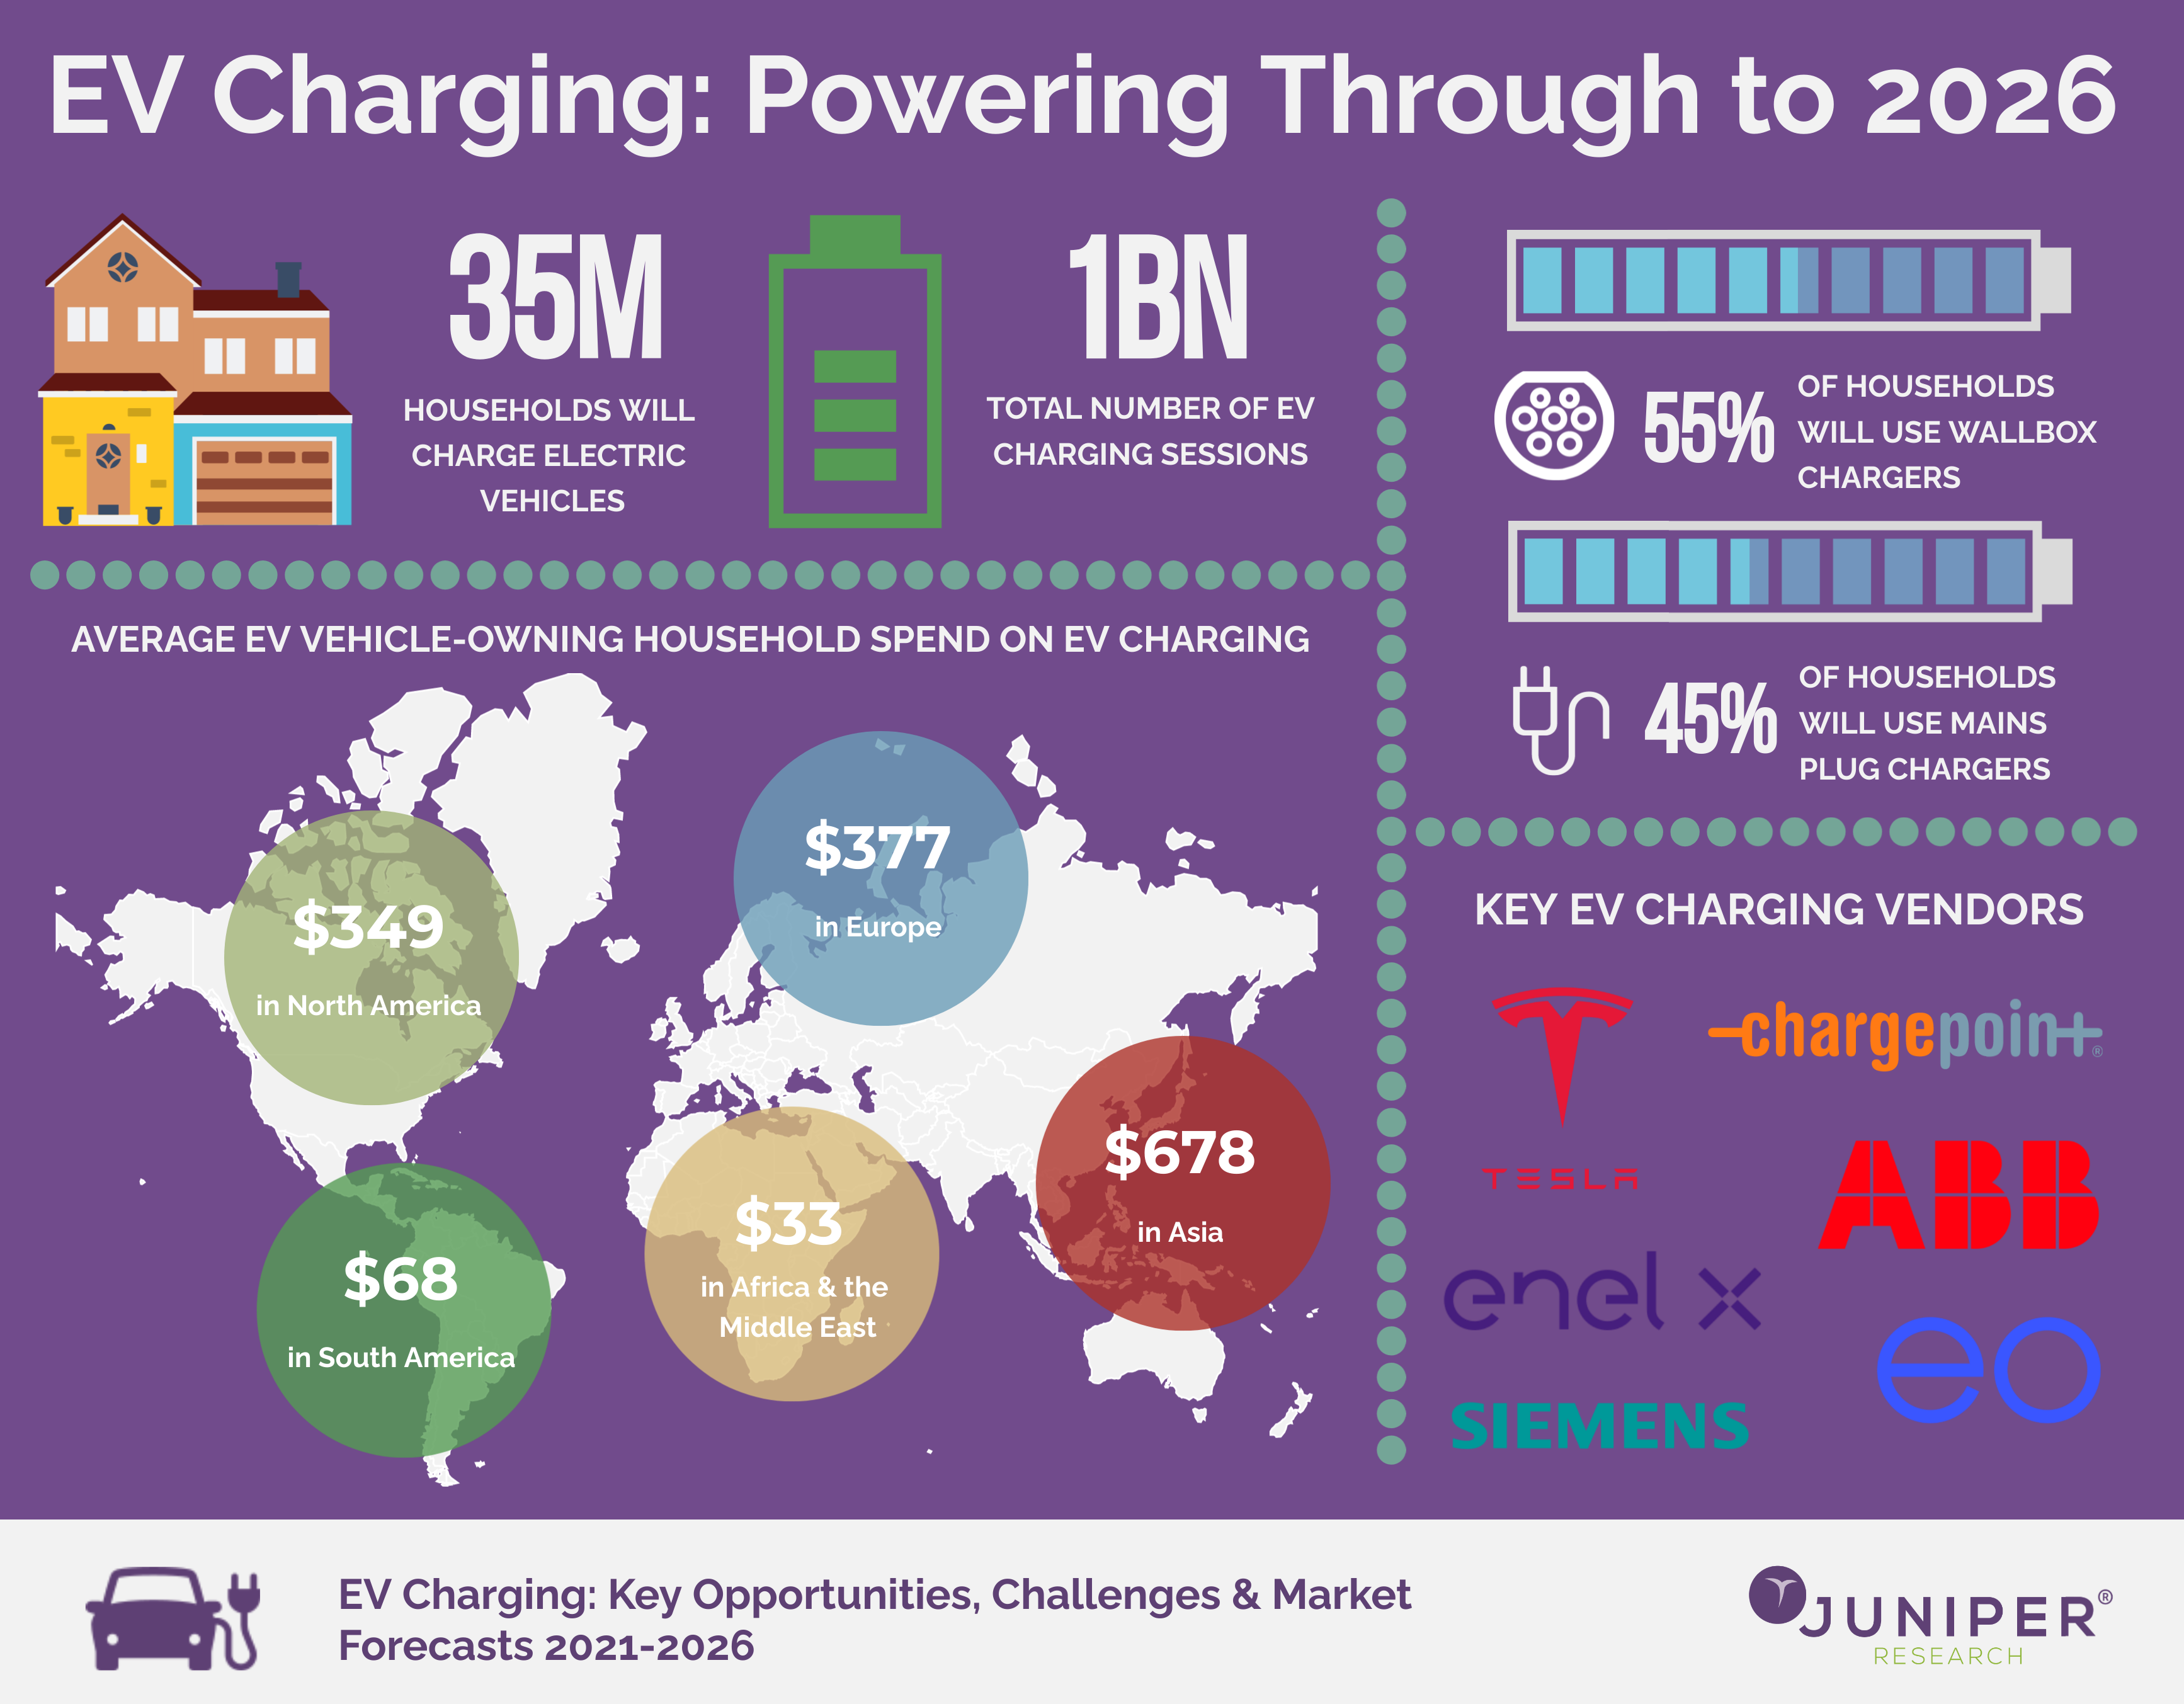 Home EV Charging Spend to Exceed $16 Billion Globally by 2026